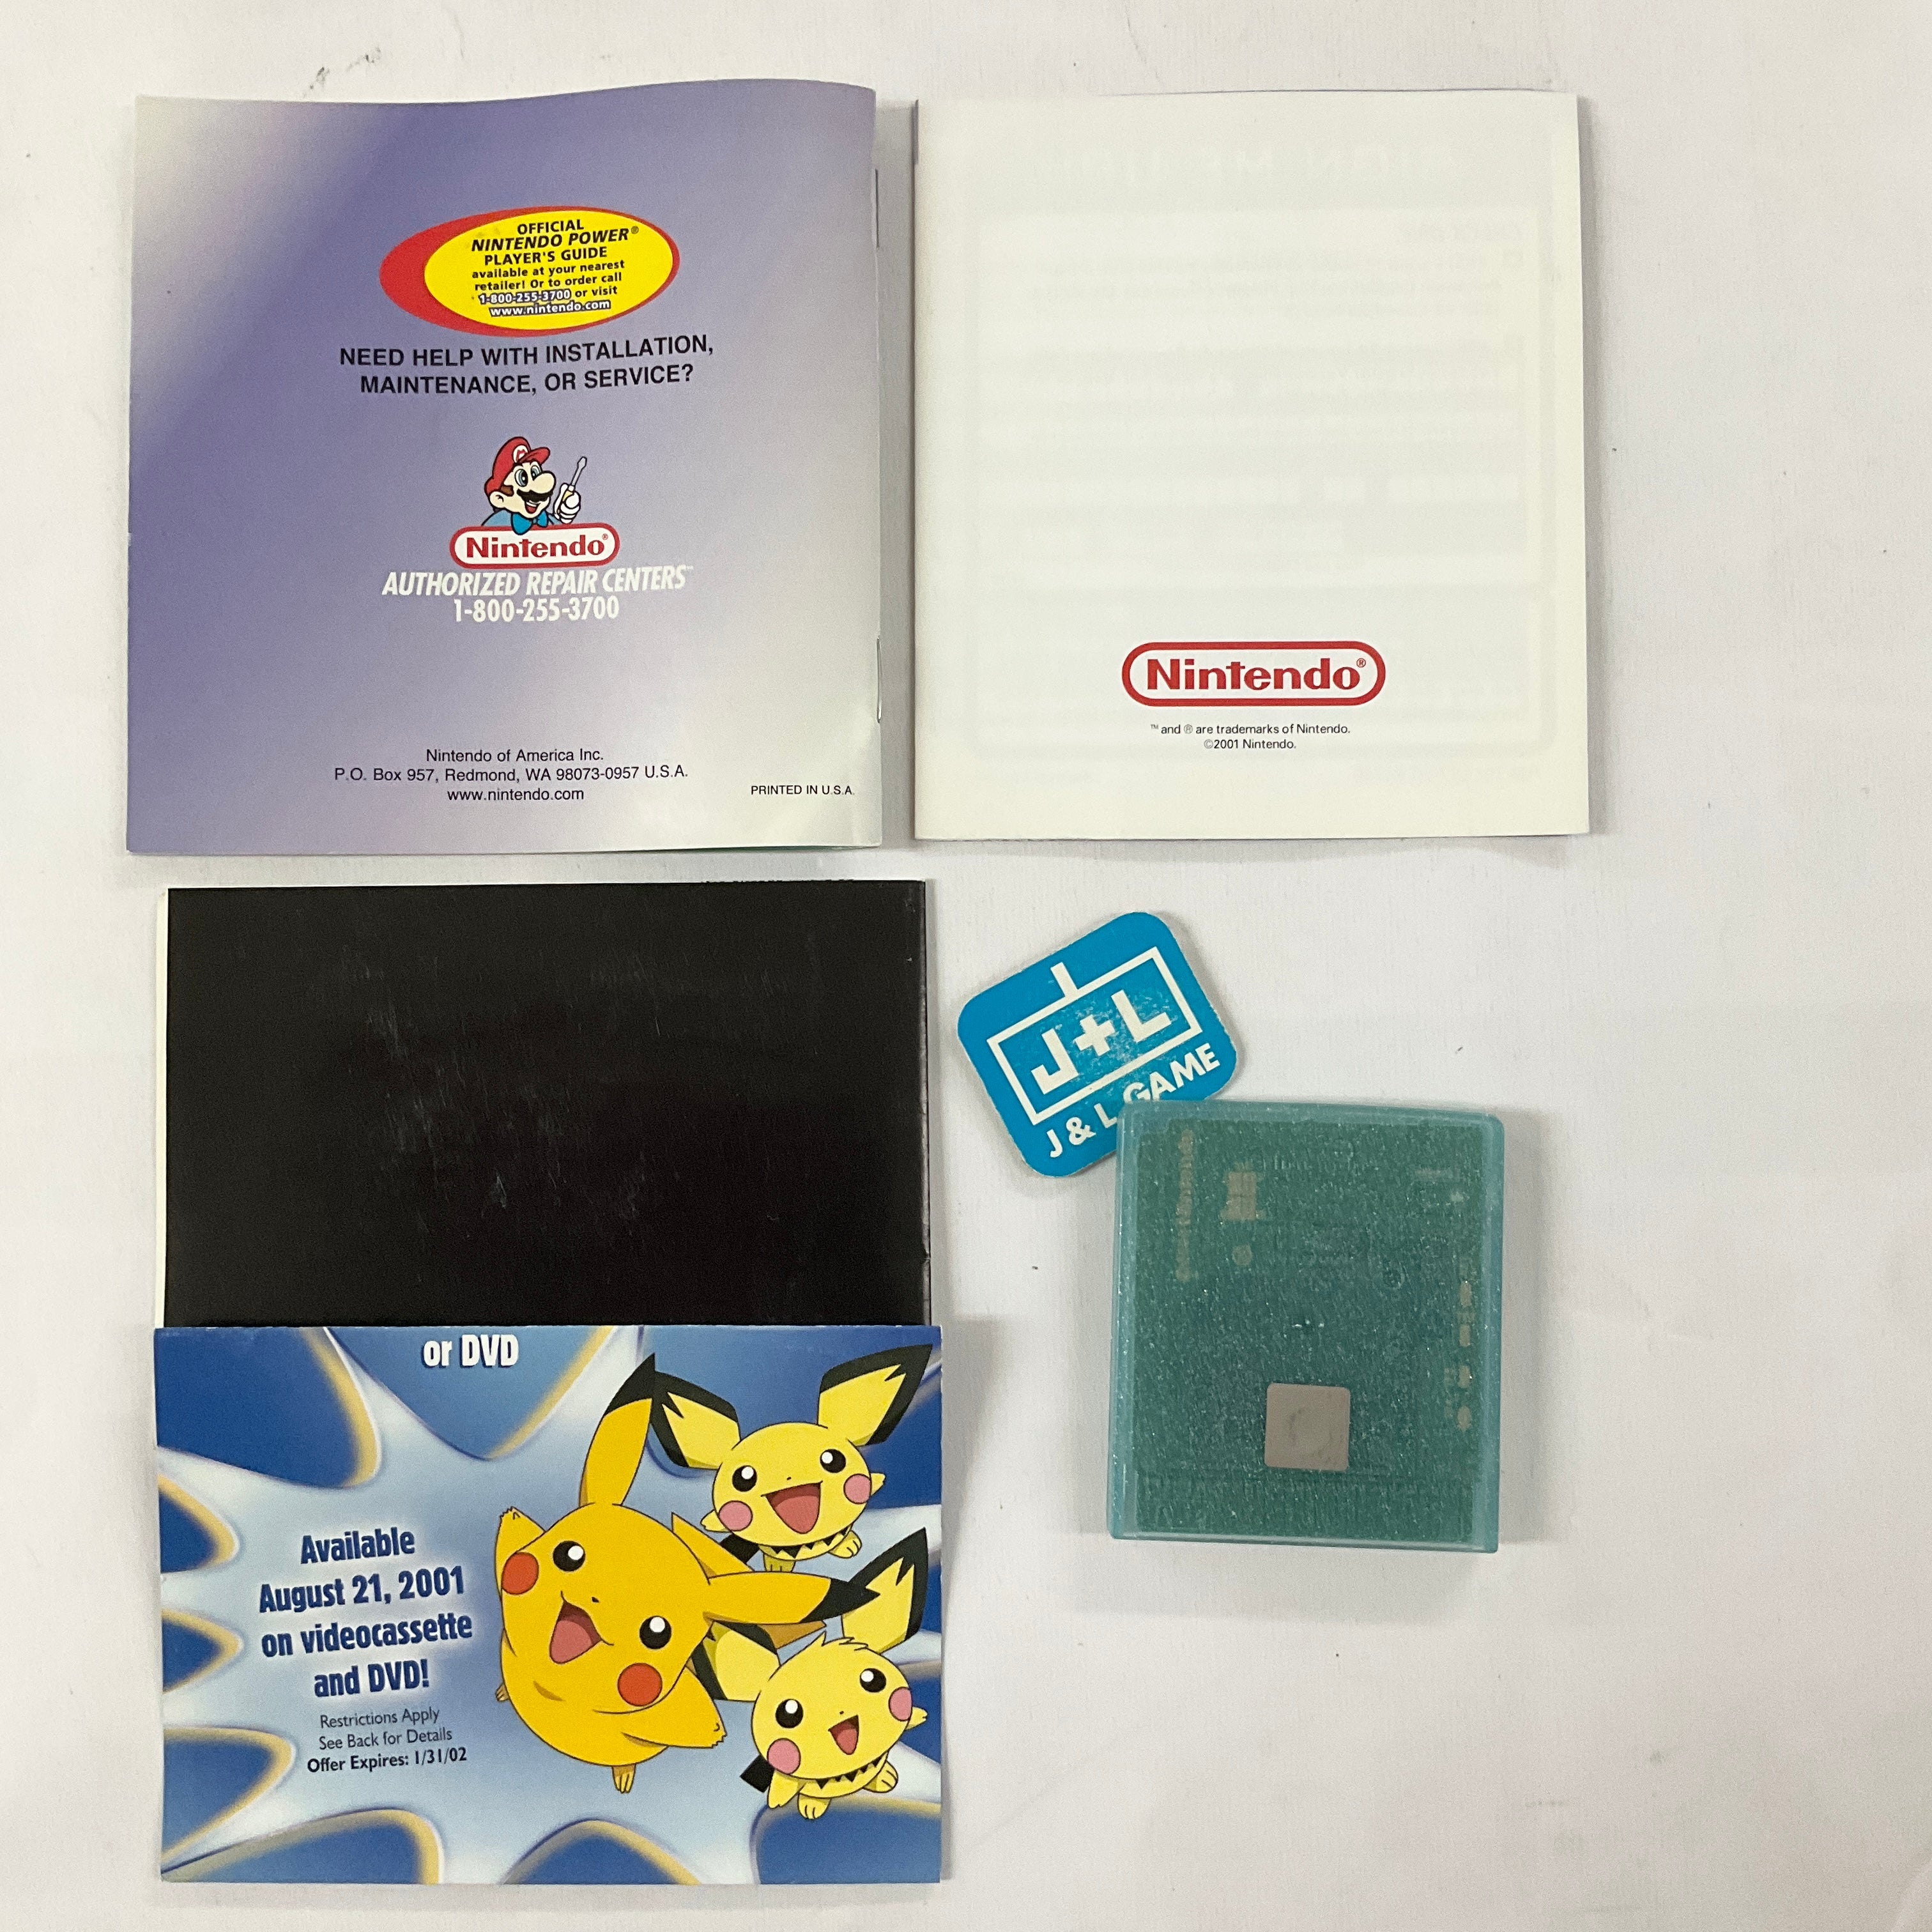 Pokemon Crystal Version - (GBC) Game Boy Color [Pre-Owned] Video Games Nintendo   